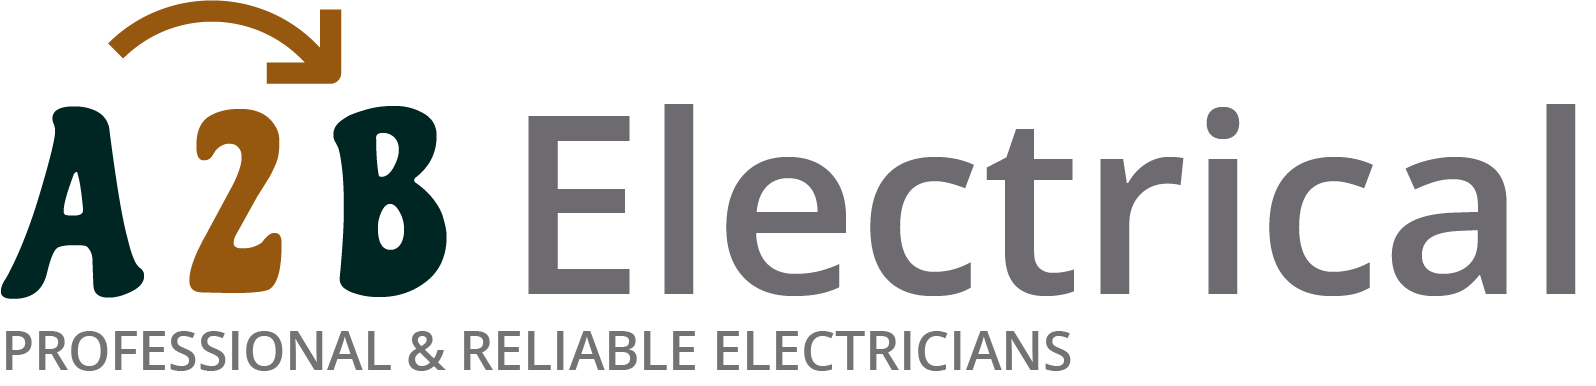 If you have electrical wiring problems in Anerley, we can provide an electrician to have a look for you. 